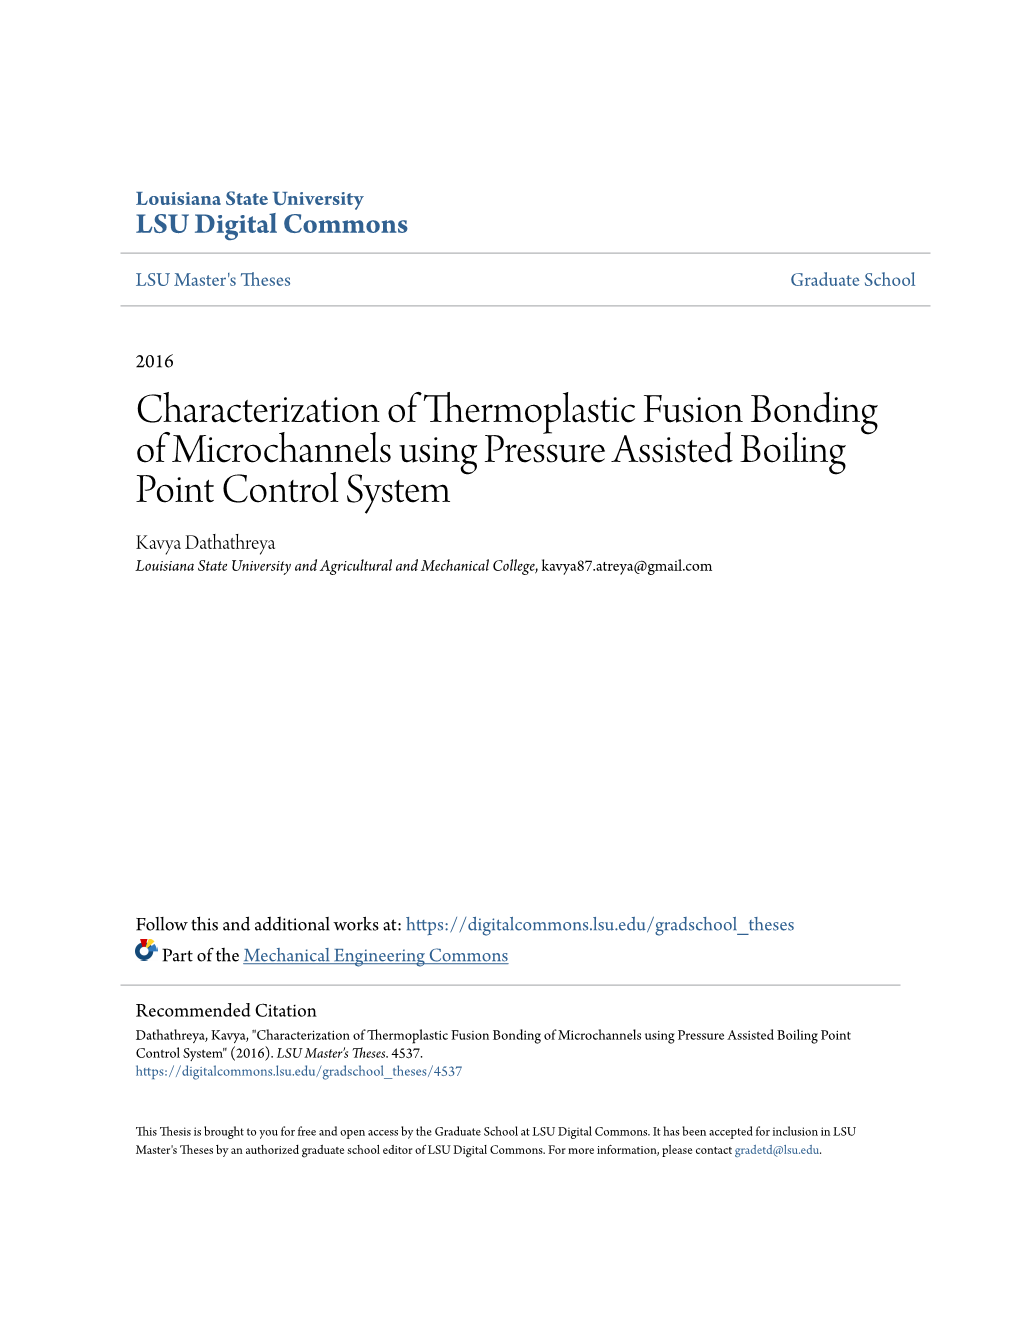 Characterization of Thermoplastic Fusion Bonding of Microchannels